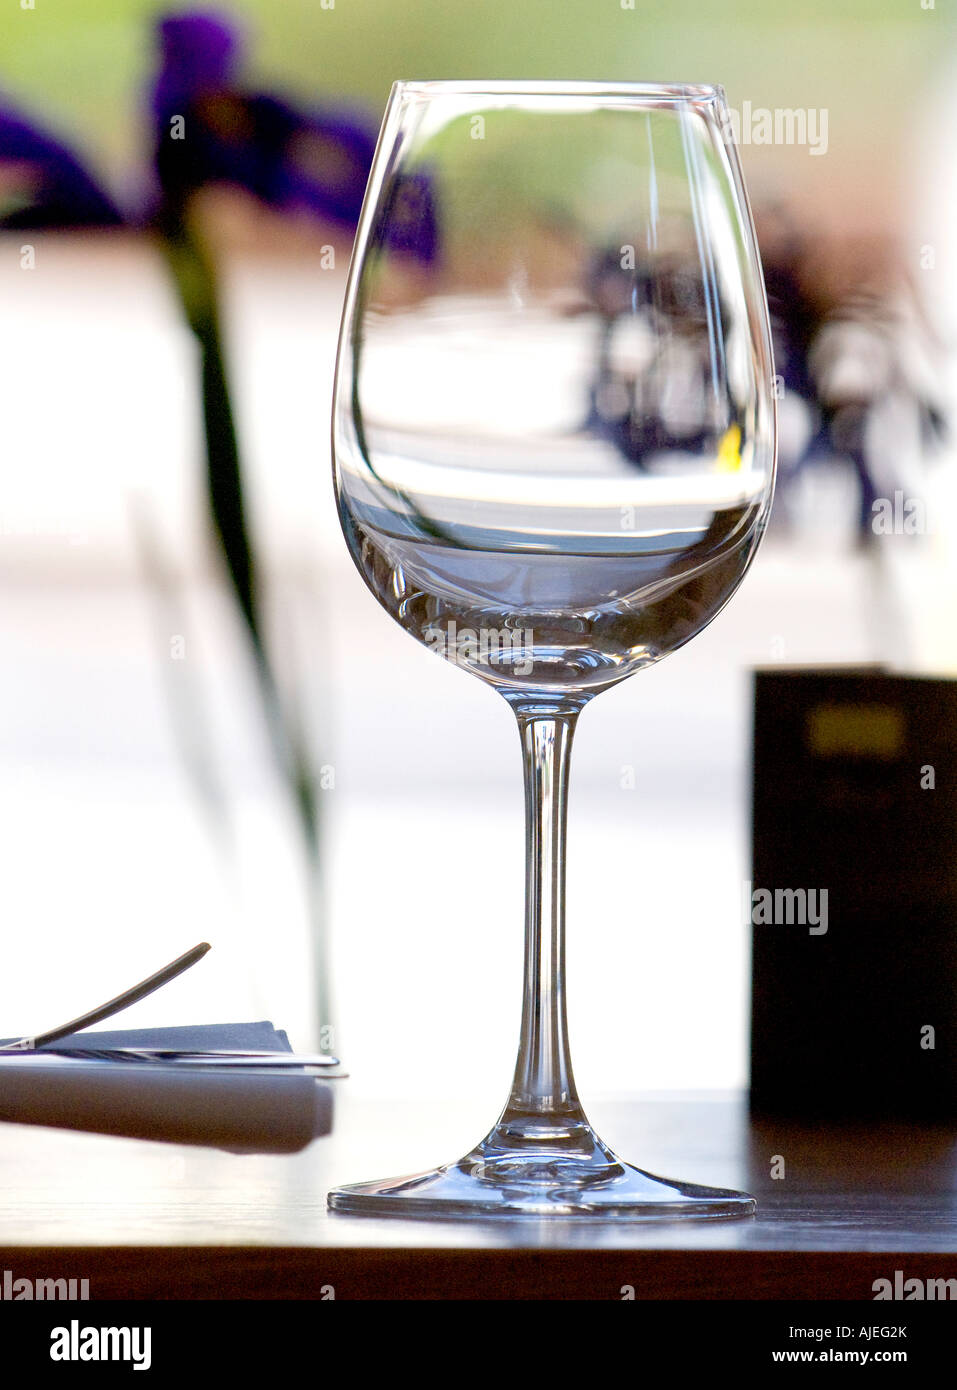 An empty wine glass on a restaurant table Picture by Jim Holden. Stock Photo